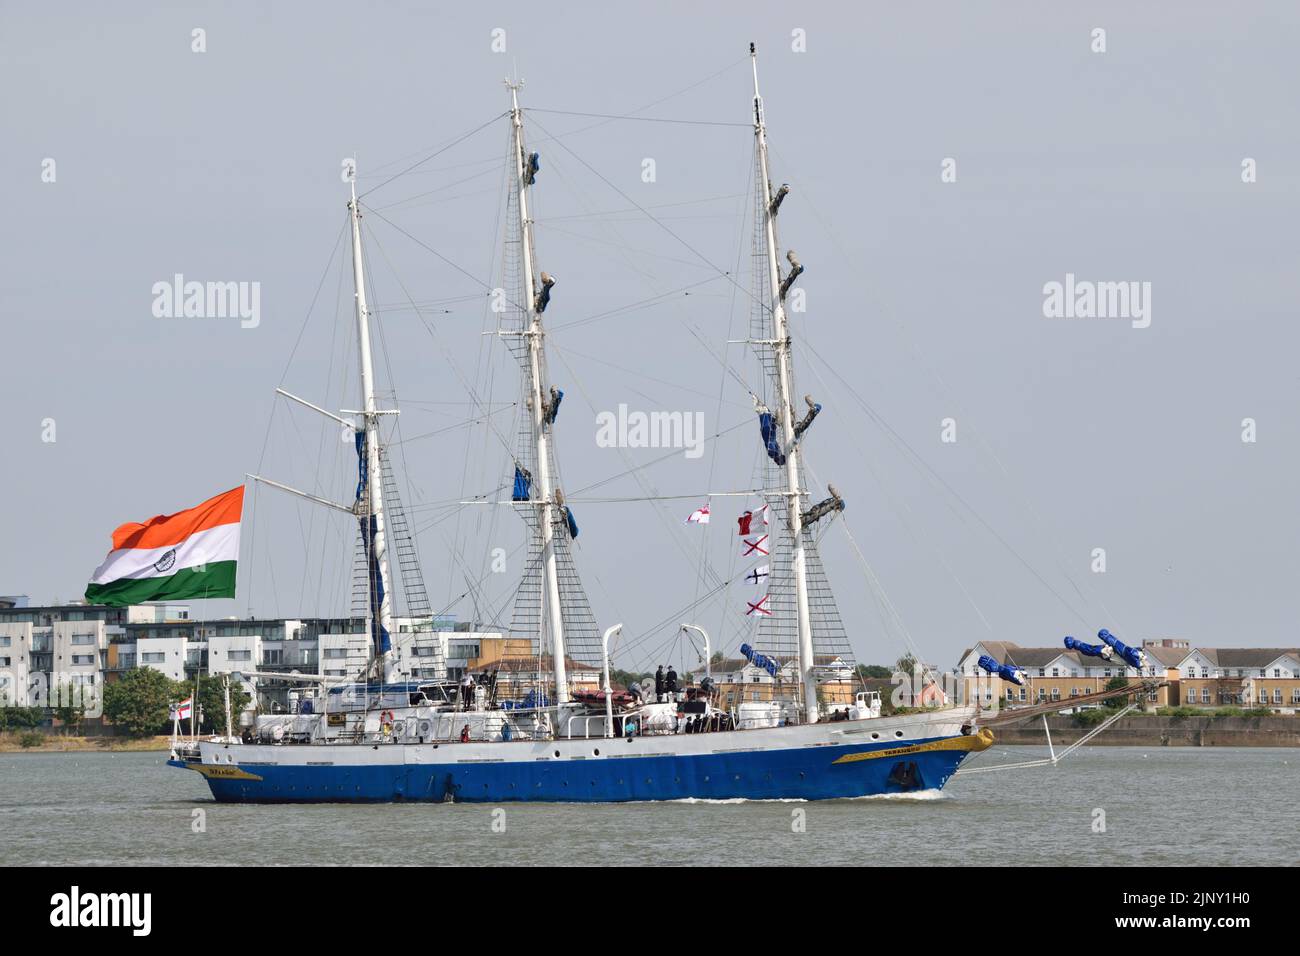 Arriving on the Thames  NS TARANGINI A75, the Indian Navy's sail training ship, staying at West India Doc and visiting London as part of #IndiaAt75 / #AzadiKaAmritMahotsav events. Stock Photo